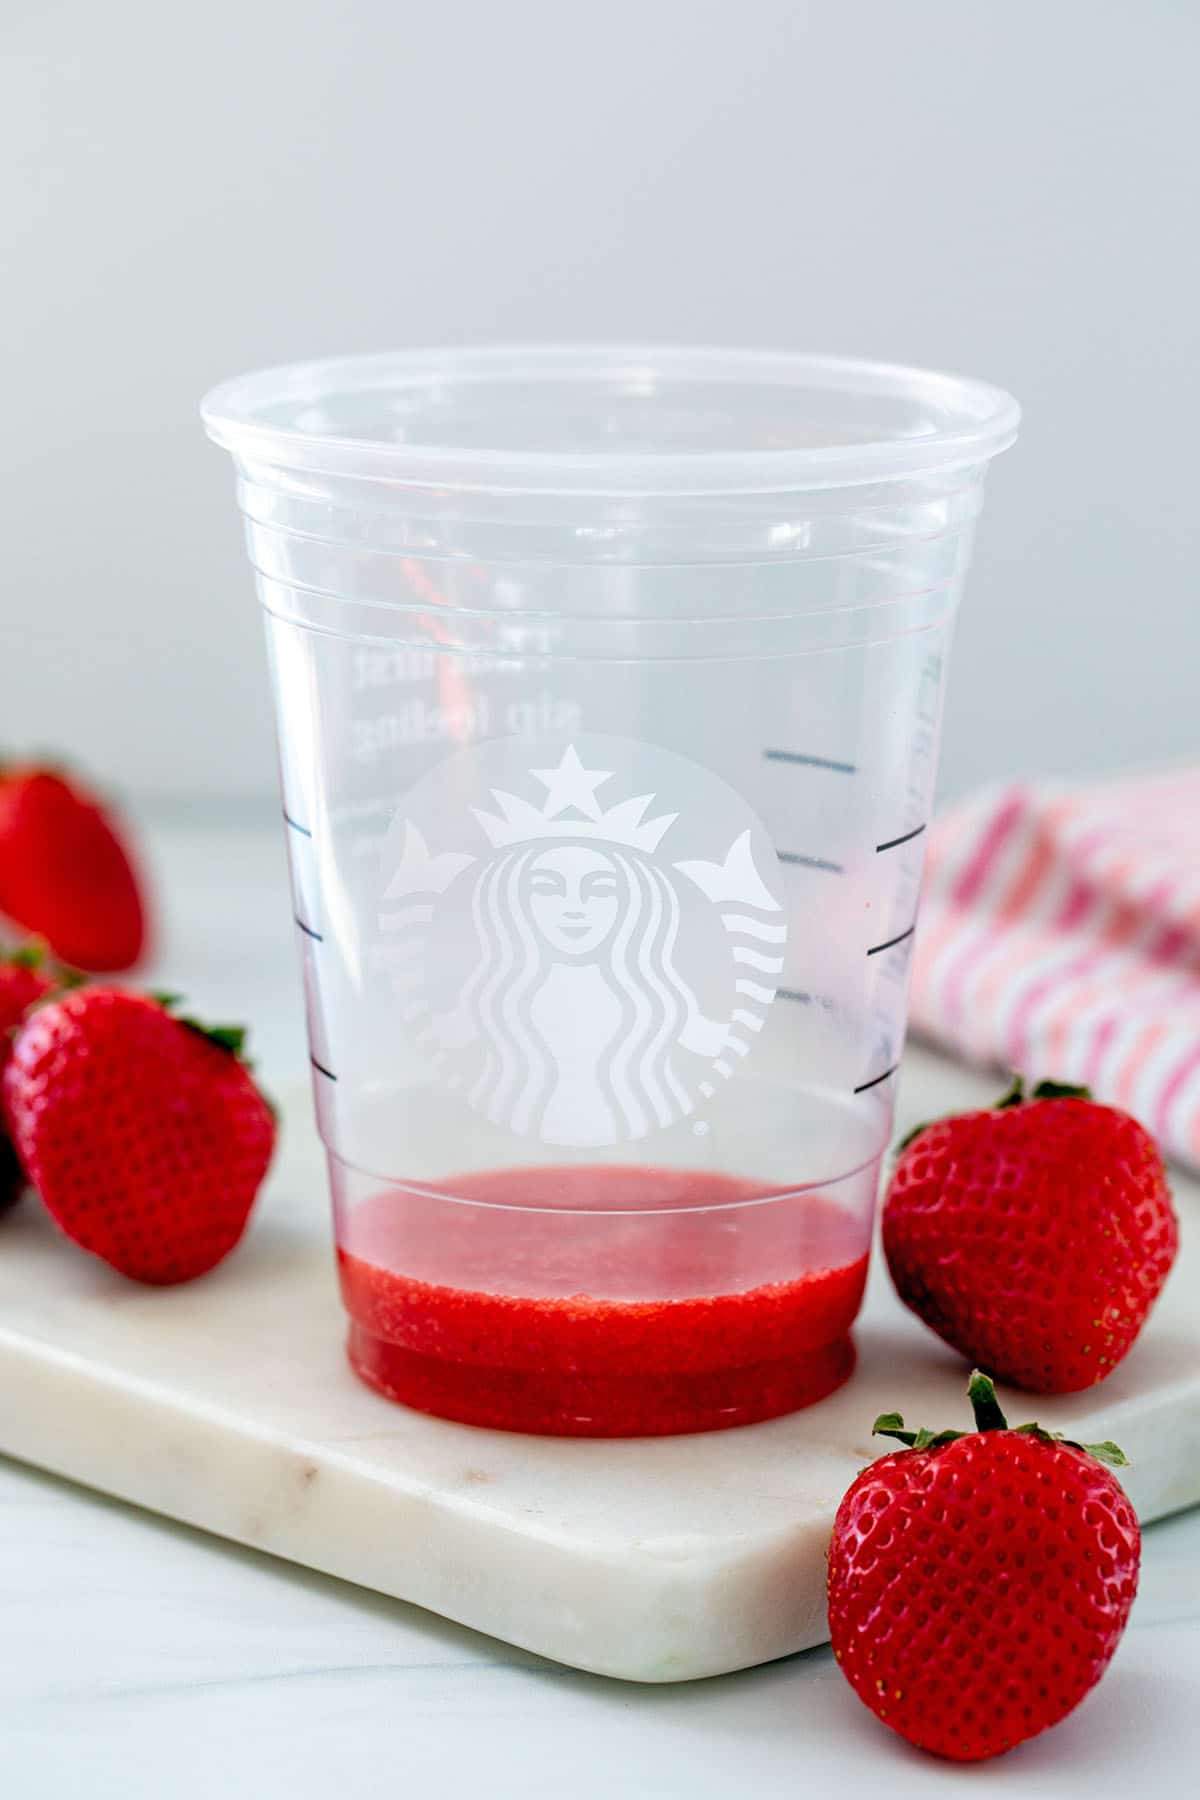 Strawberry Starbucks Cup With Straw Topper 